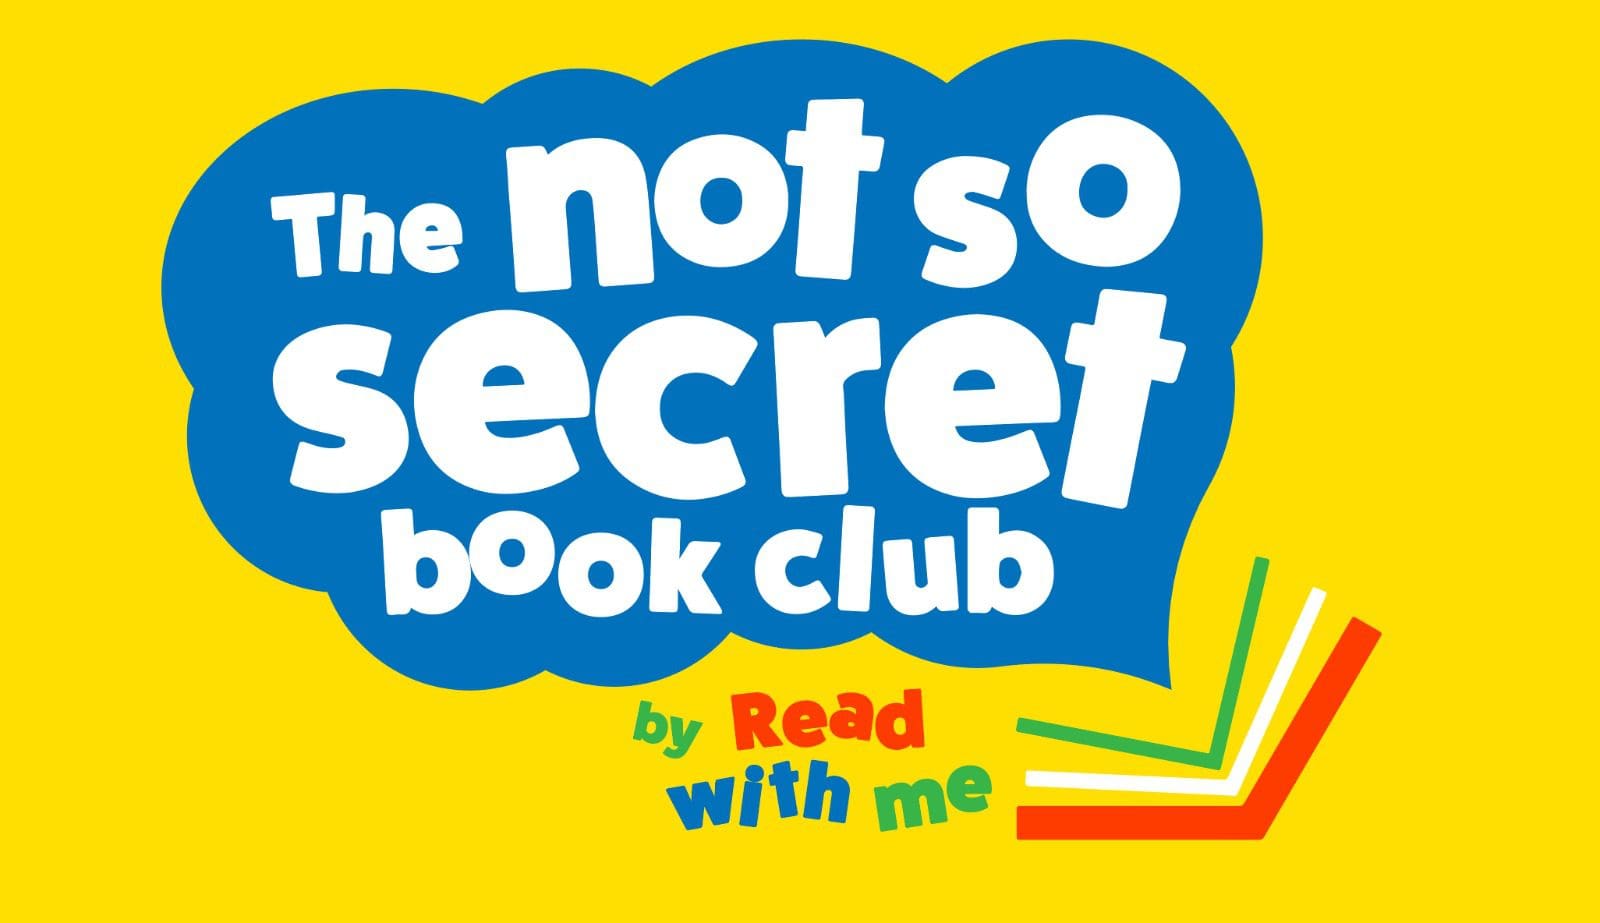 The Not So Secret Book Club by Read With Me - Thursday 1st June between 12 noon to 3pm at Gloucester Cathedral.